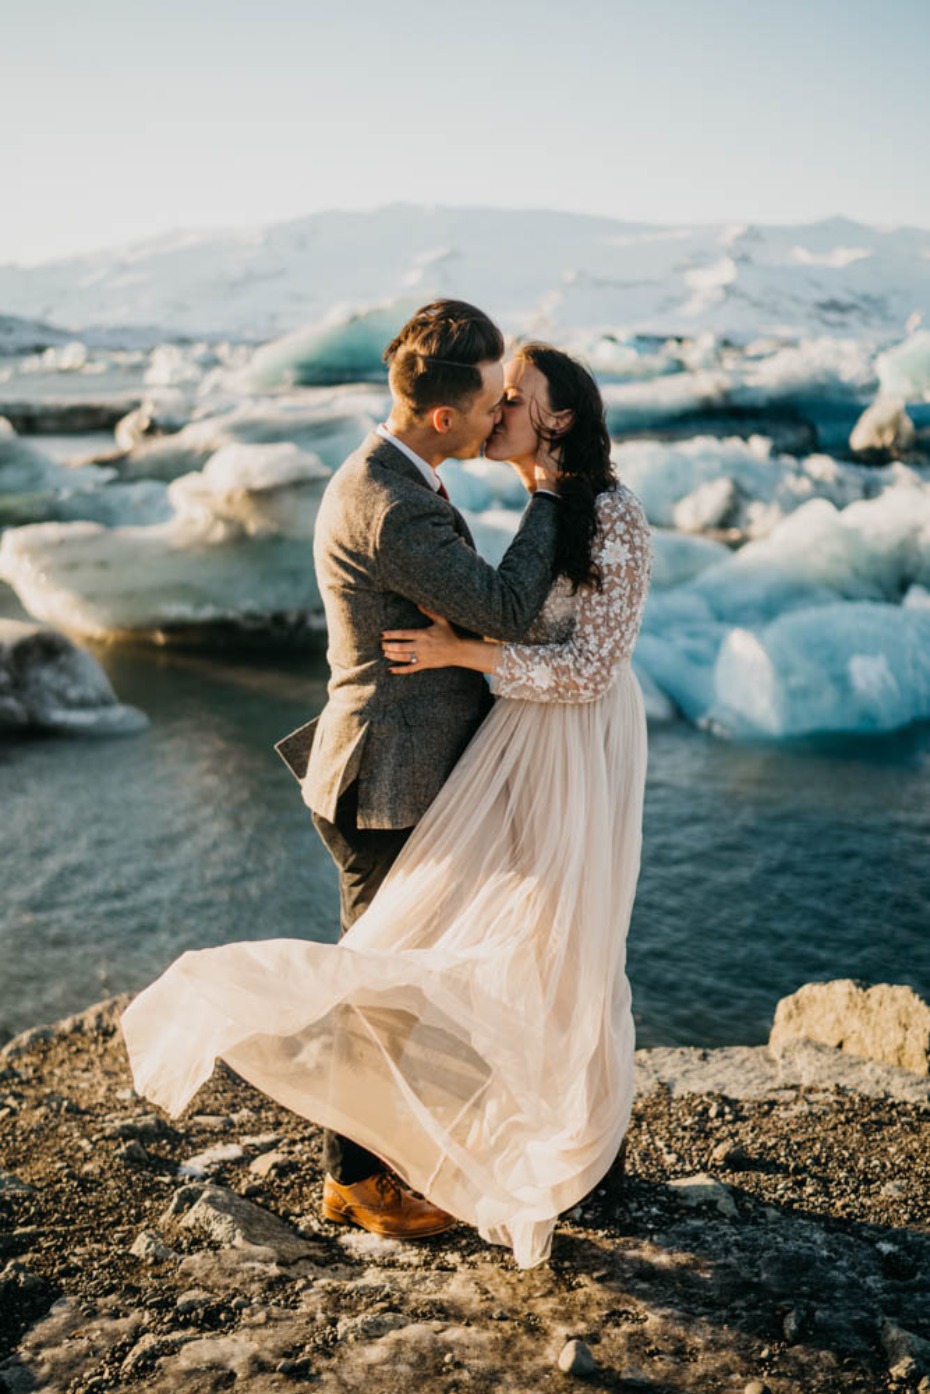 A wildly romantic elopement in Iceland